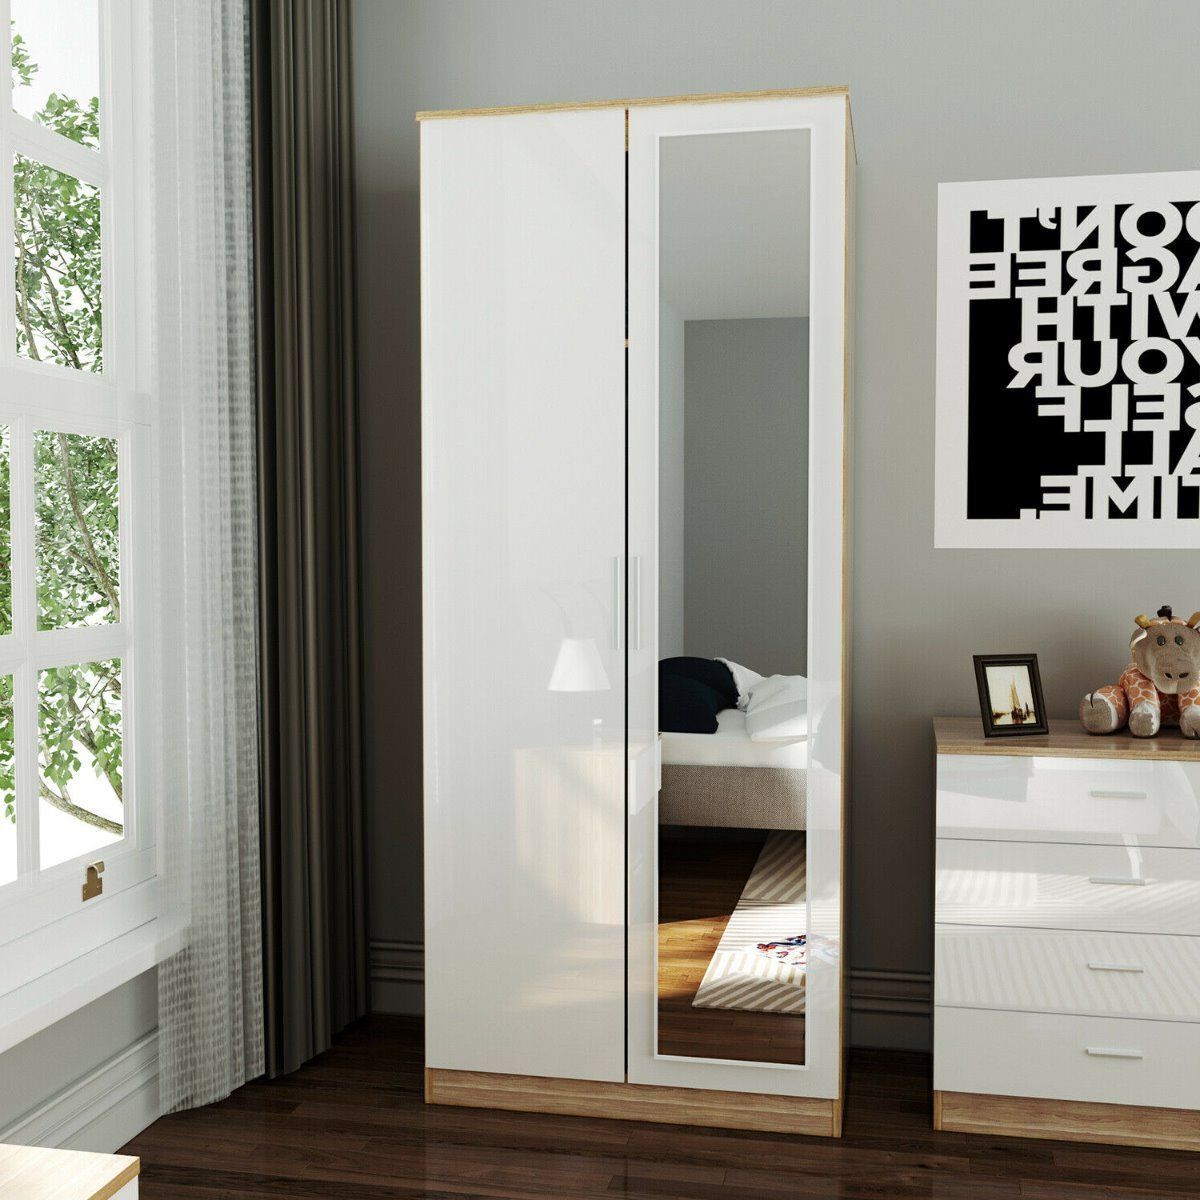 Elegant 2 Door Mirror Wardrobe In White And Oak Finish Soft Close Hinged  Doors Intended For Single White Wardrobes With Drawers (View 12 of 20)